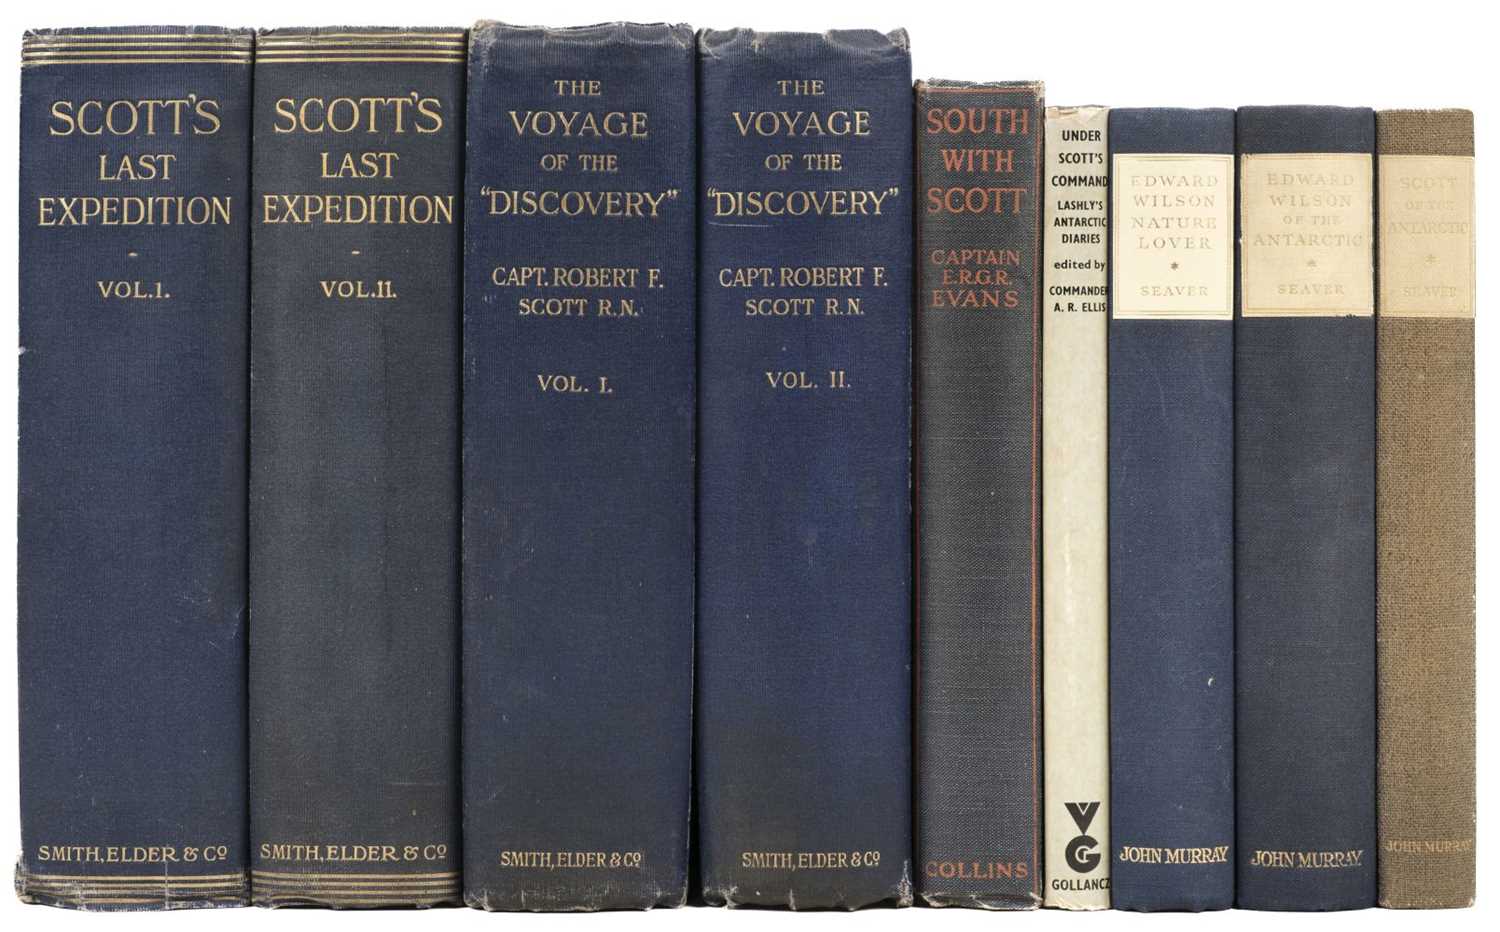 Lot 22 - Evans (Edward). South with Scott, 1st edition, London: W. Collins Sons & Co, 1921